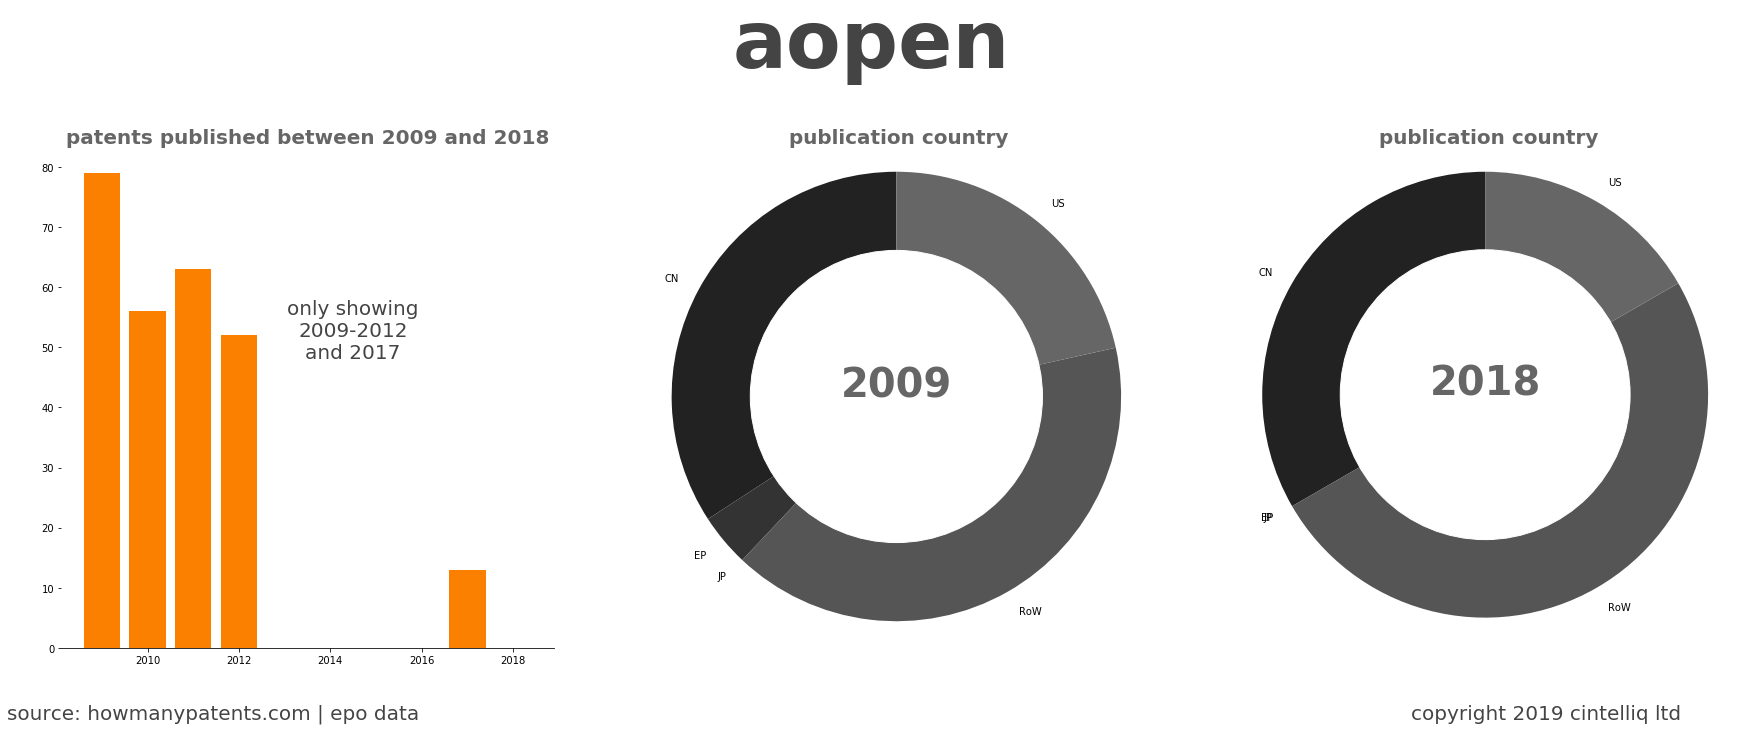 summary of patents for Aopen